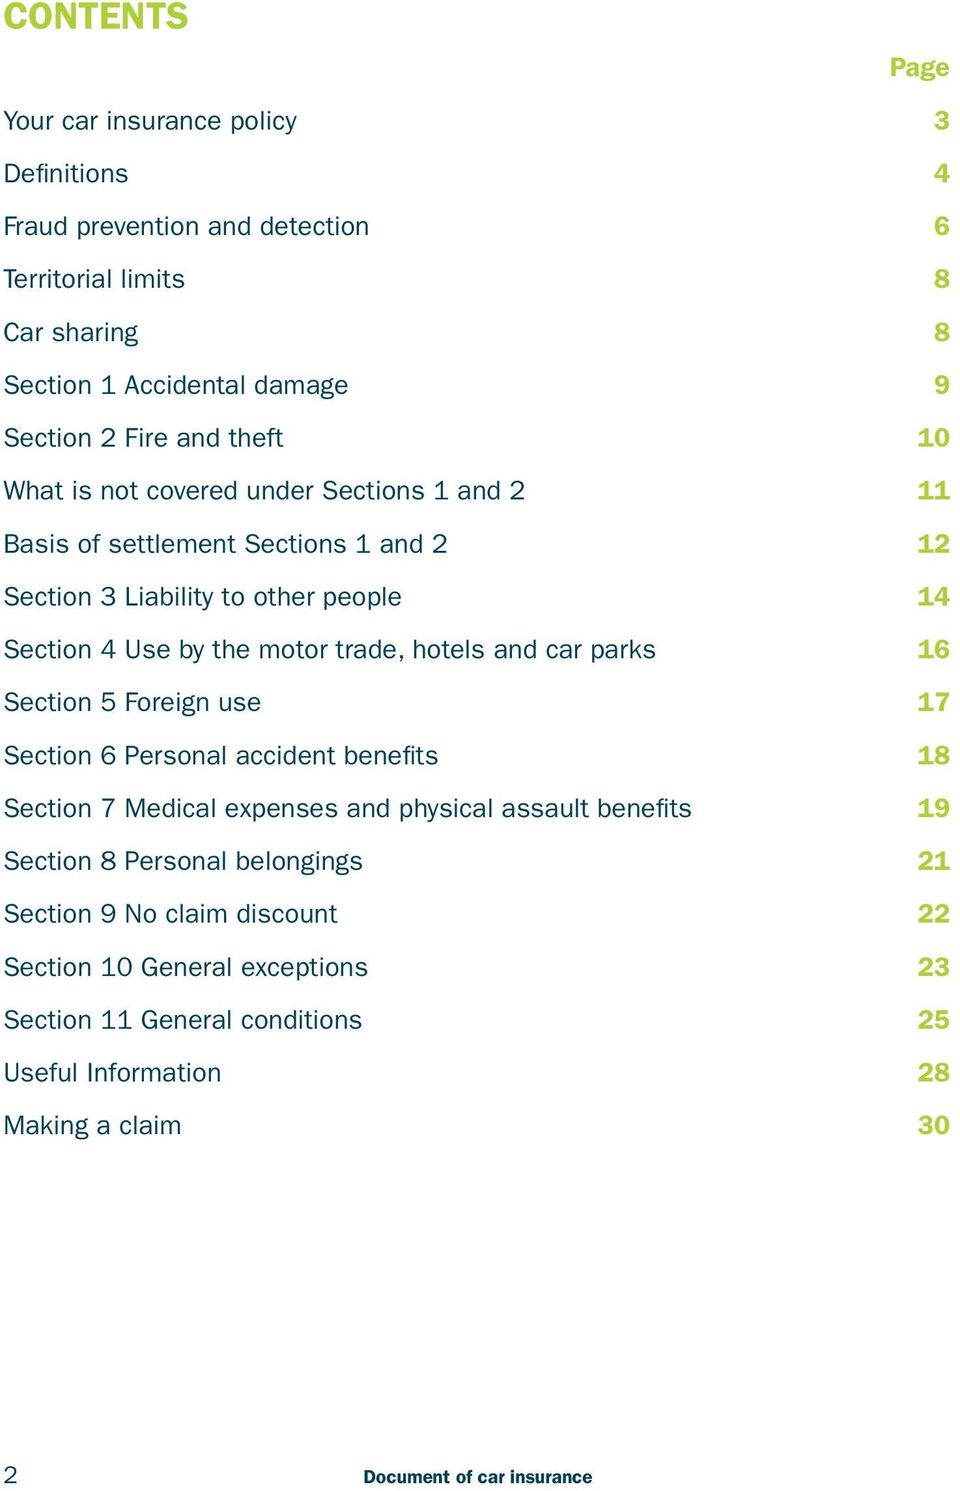 hotels and car parks 16 Section 5 Foreign use 17 Section 6 Personal accident benefits 18 Section 7 Medical expenses and physical assault benefits 19 Section 8 Personal